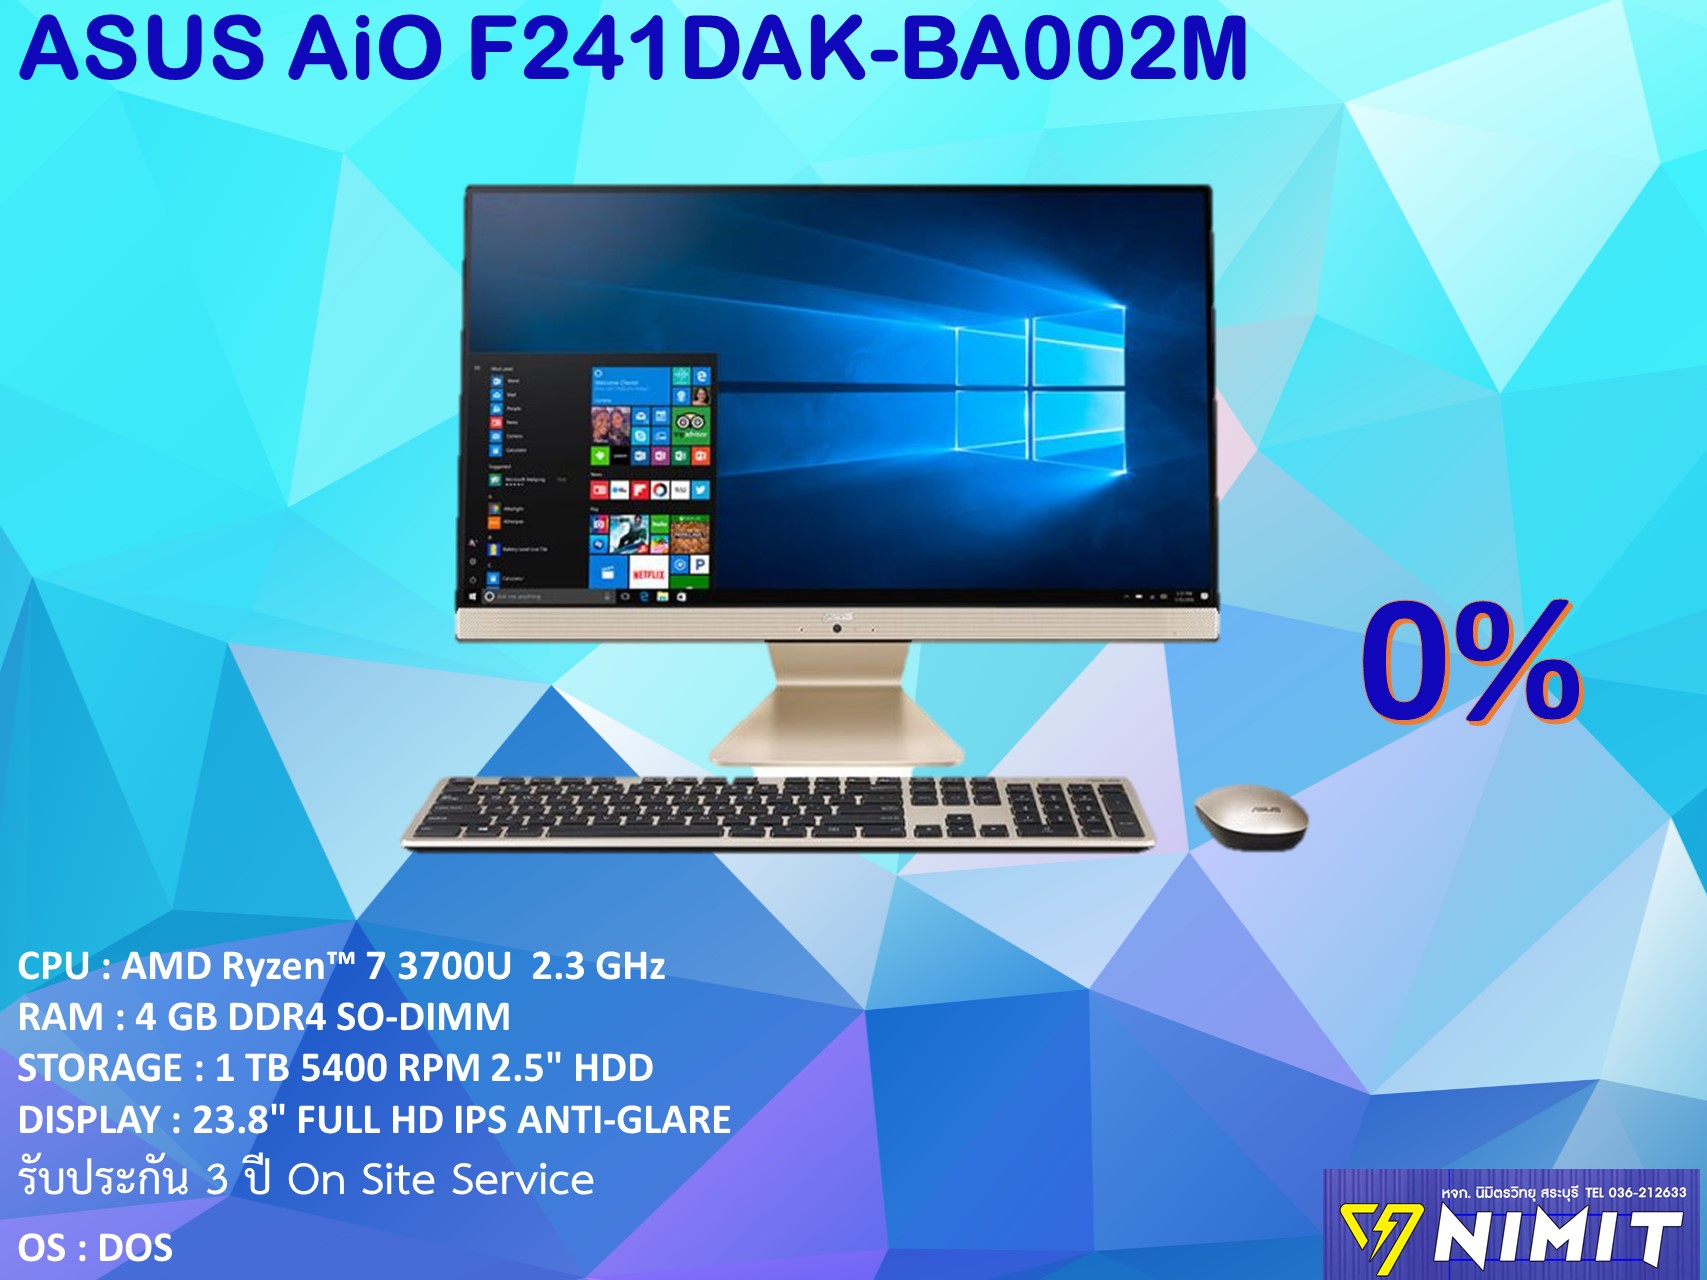 All in one PC Asus F241DAK-BA002M